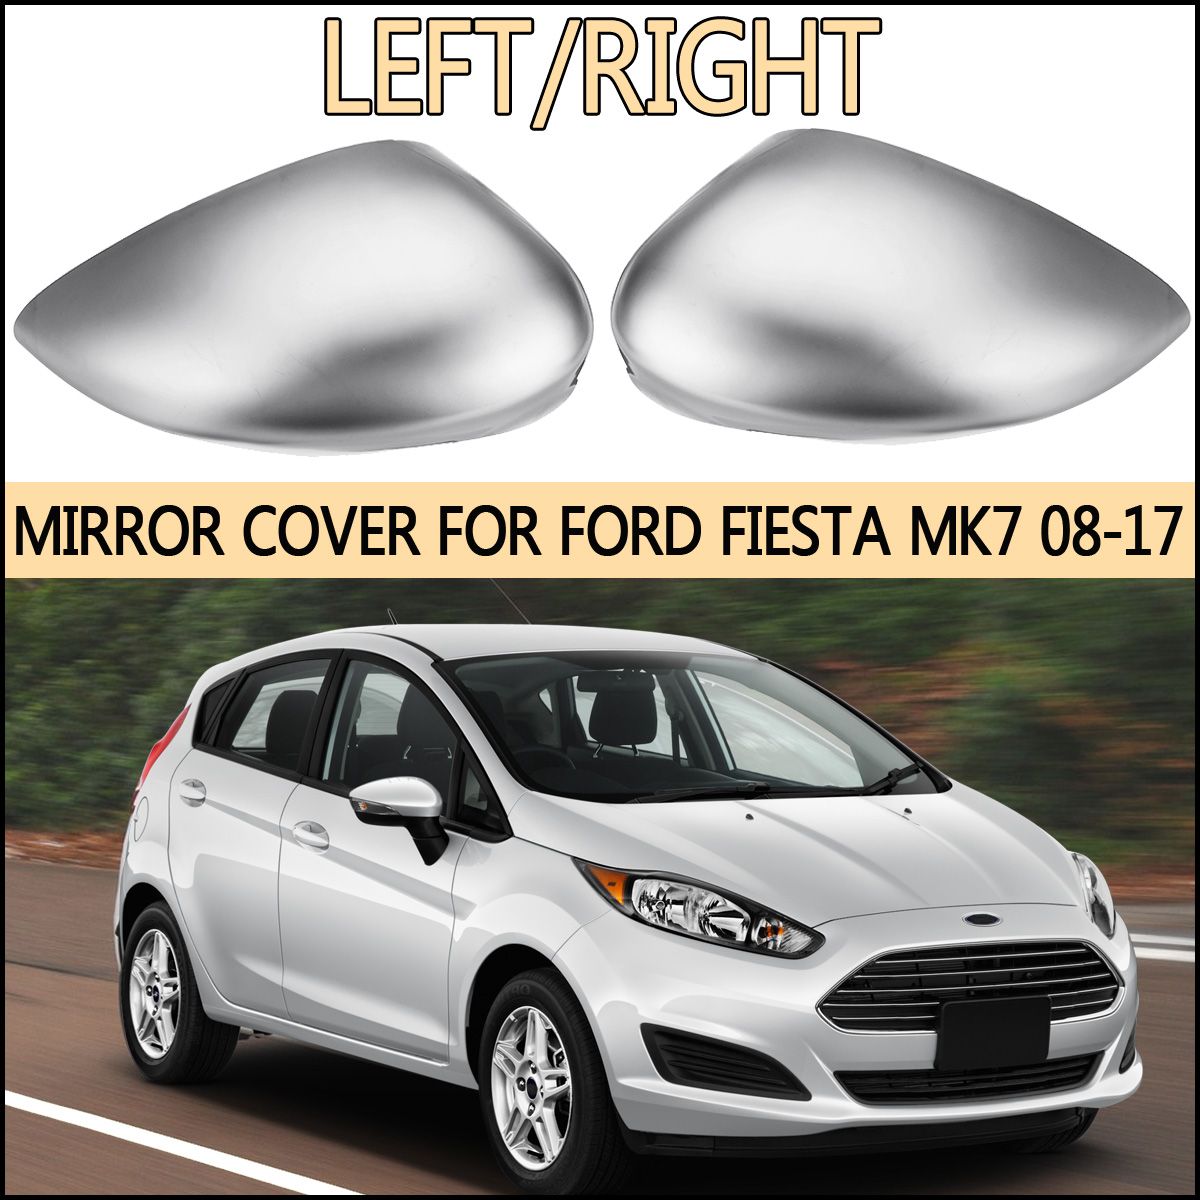 Chrome-Car-Rearview-Wing-Mirror-Cover-Cap-LeftRight-For-Ford-Fiesta-MK7-2008-2017-1639562